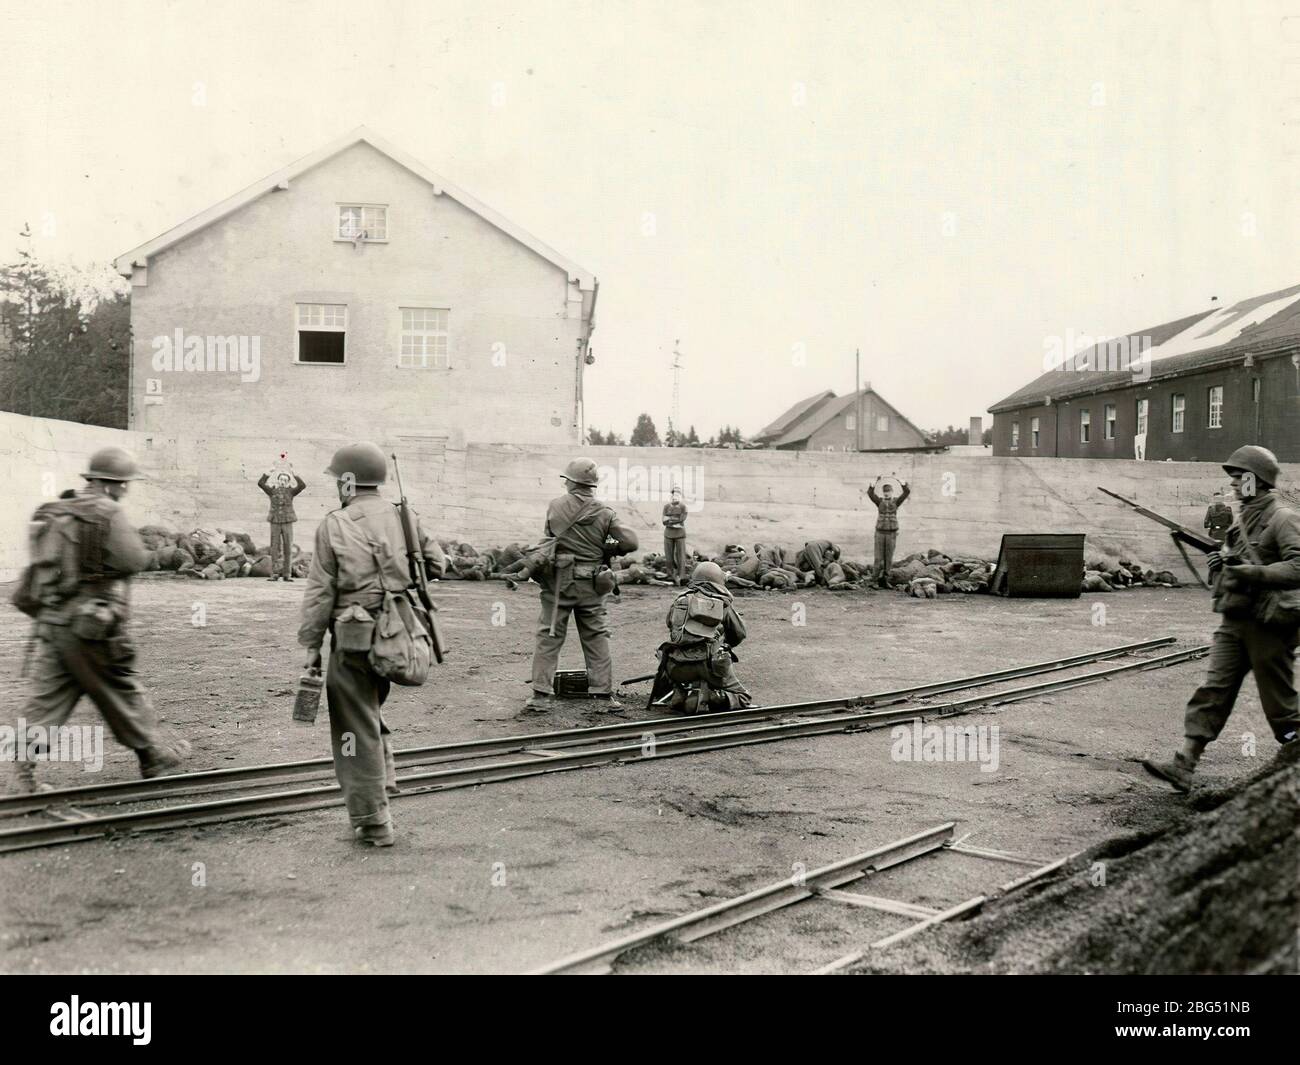 Second World War documentary. U.S. Army soldiers prepare to summarily execute SS guards of the newly liberated Dachau concentration camp on April 29, 1945. Stock Photo